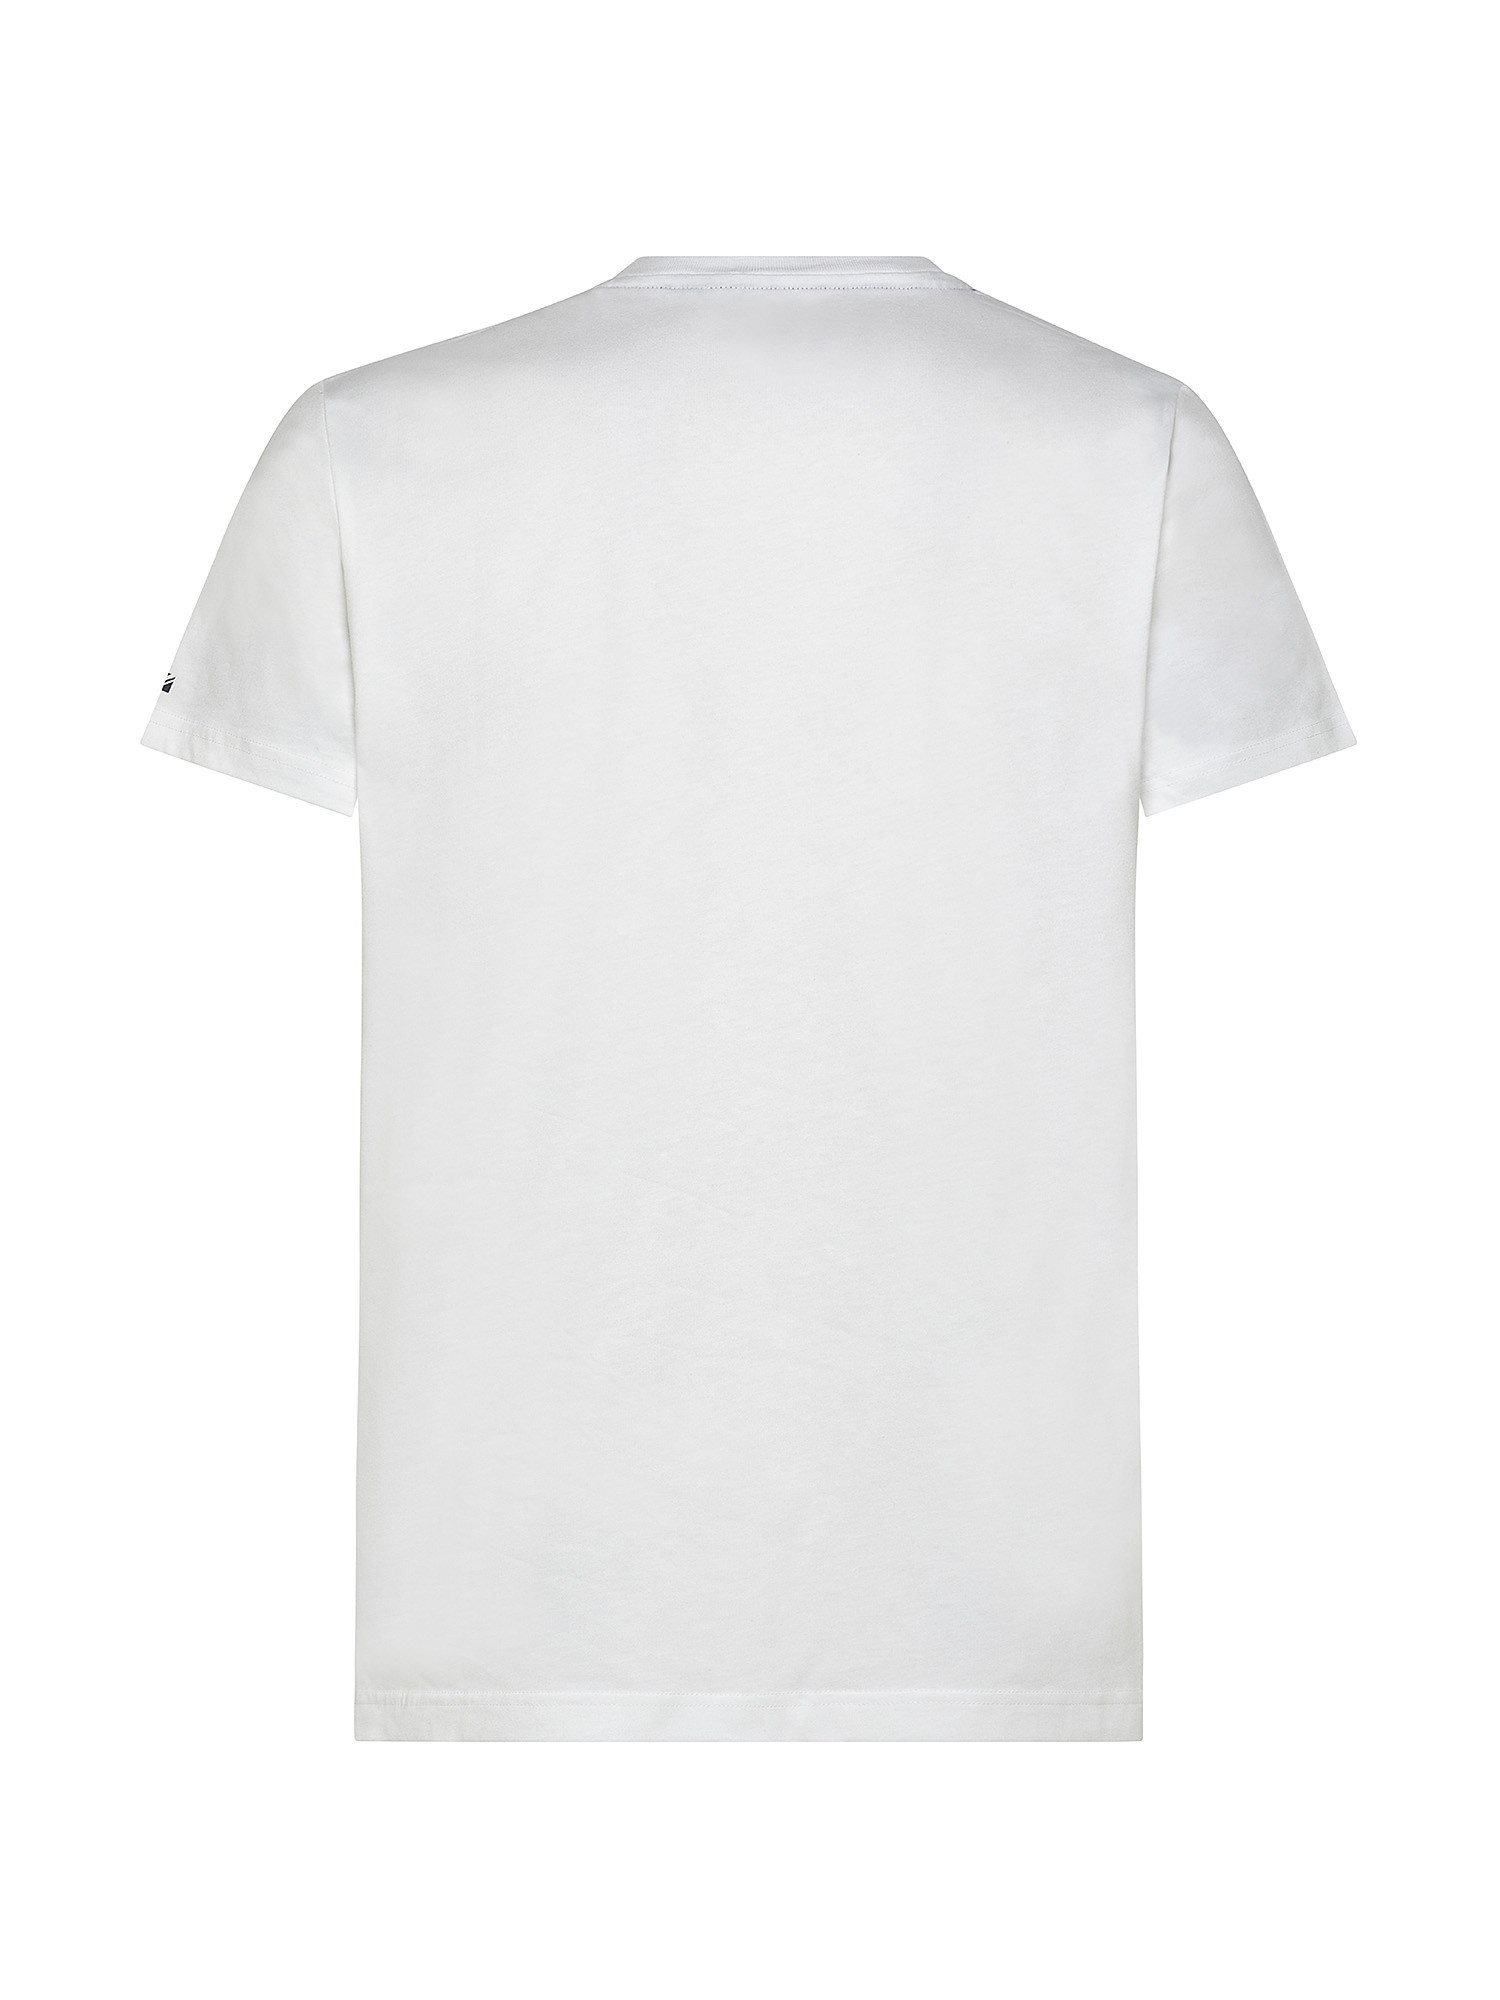 T-shirt in cotone Trey, Bianco, large image number 1